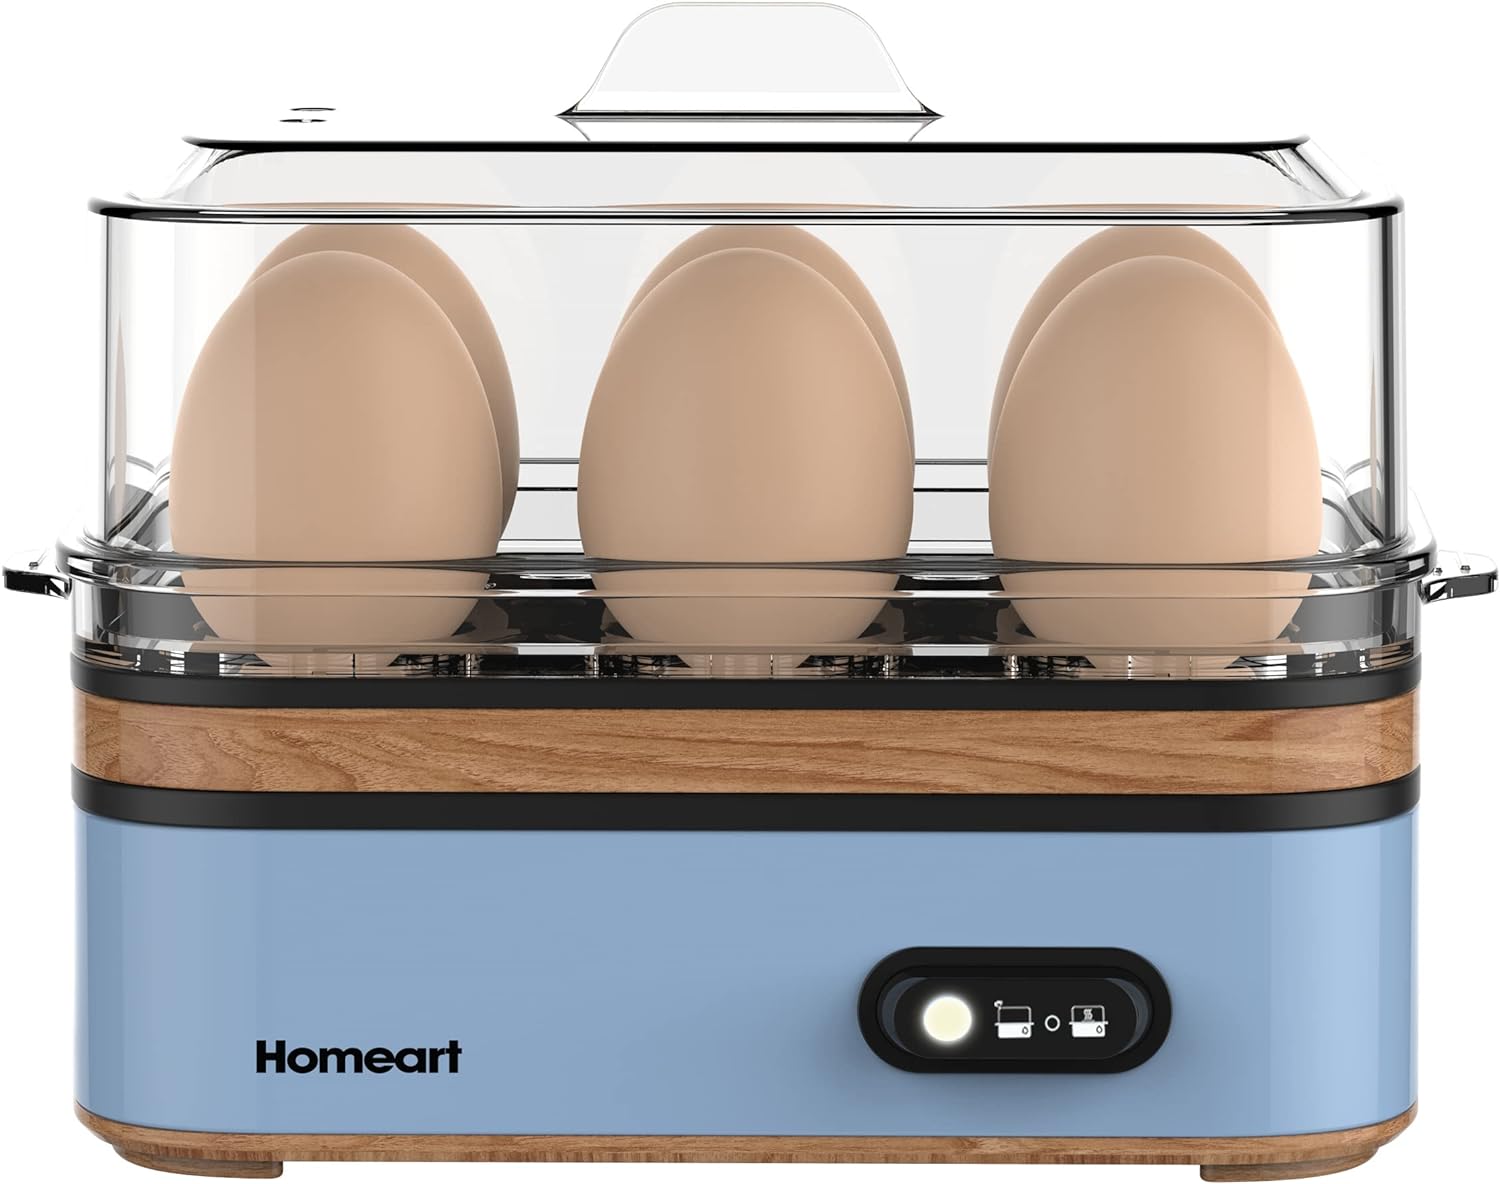 Homeart Panda Egg Boiler with Wooden Detail- Rapid Electric Hard Boiled Egg Cooker with Auto Shut-Off, Alarm and Egg Piercer, 6 Egg Capacity, Powder Blue, 400W